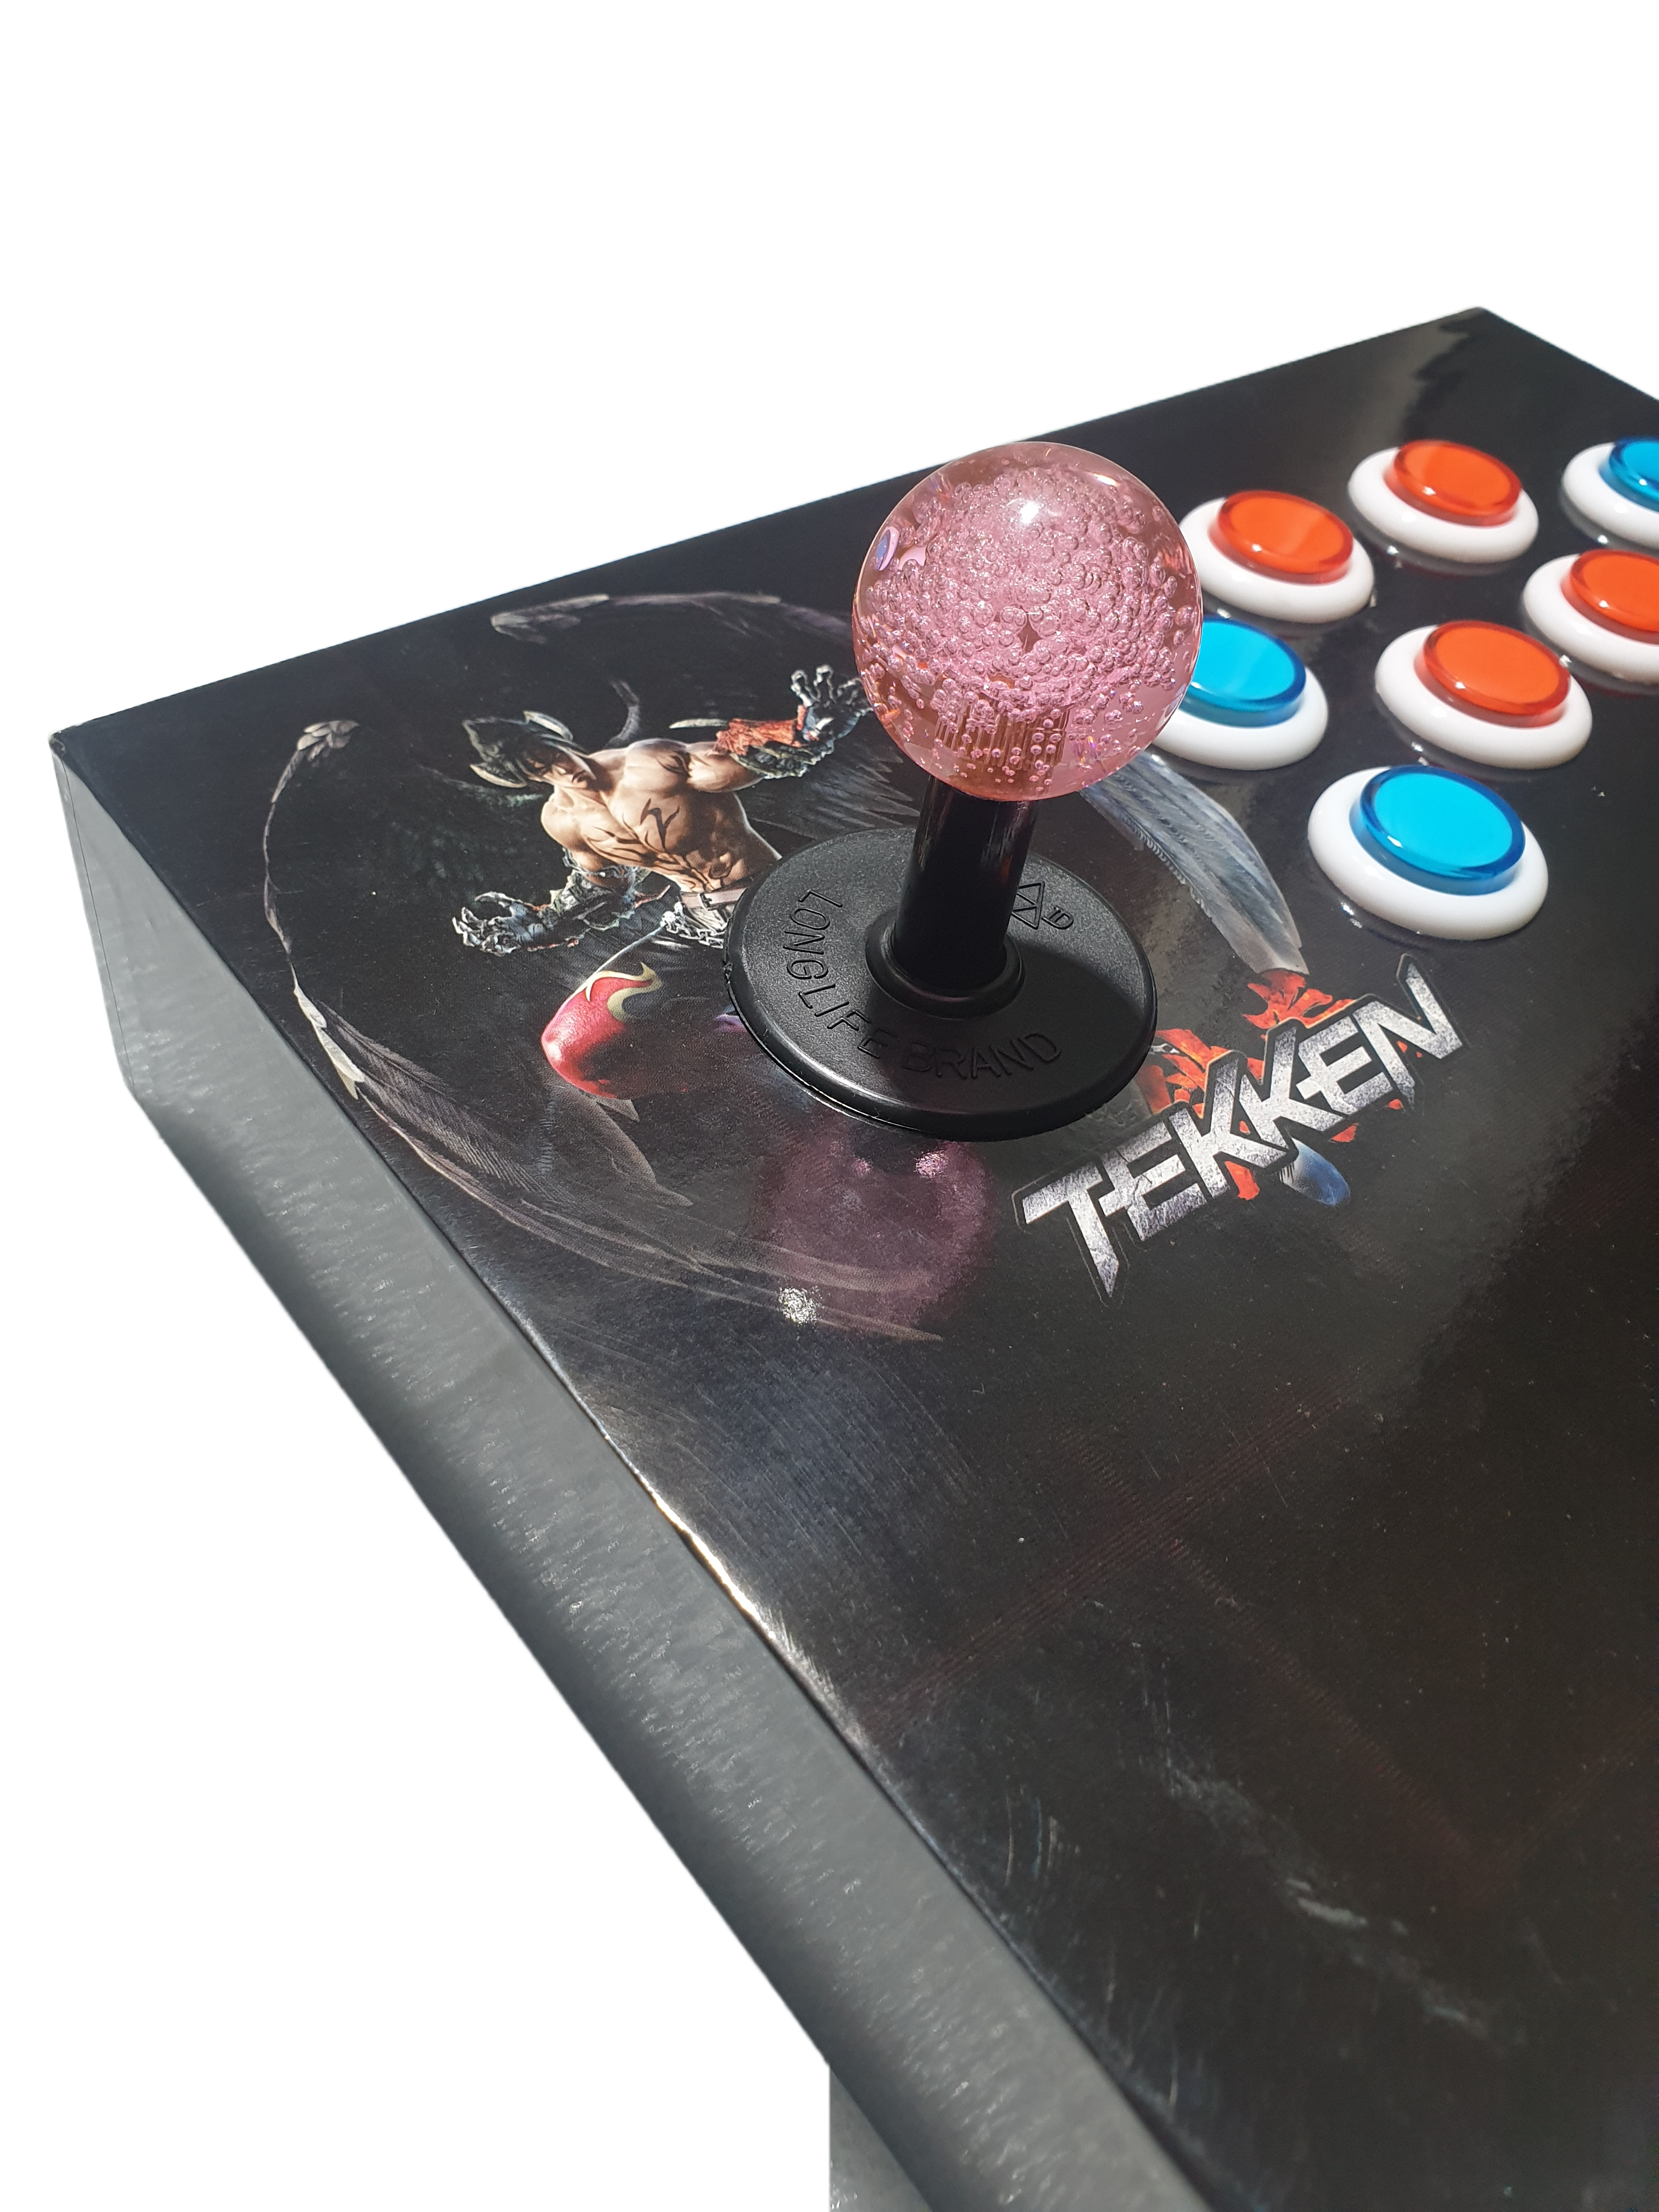 PS4 USB Arcade joystick for PS4, PS3, PC Windows and Android Mobiles